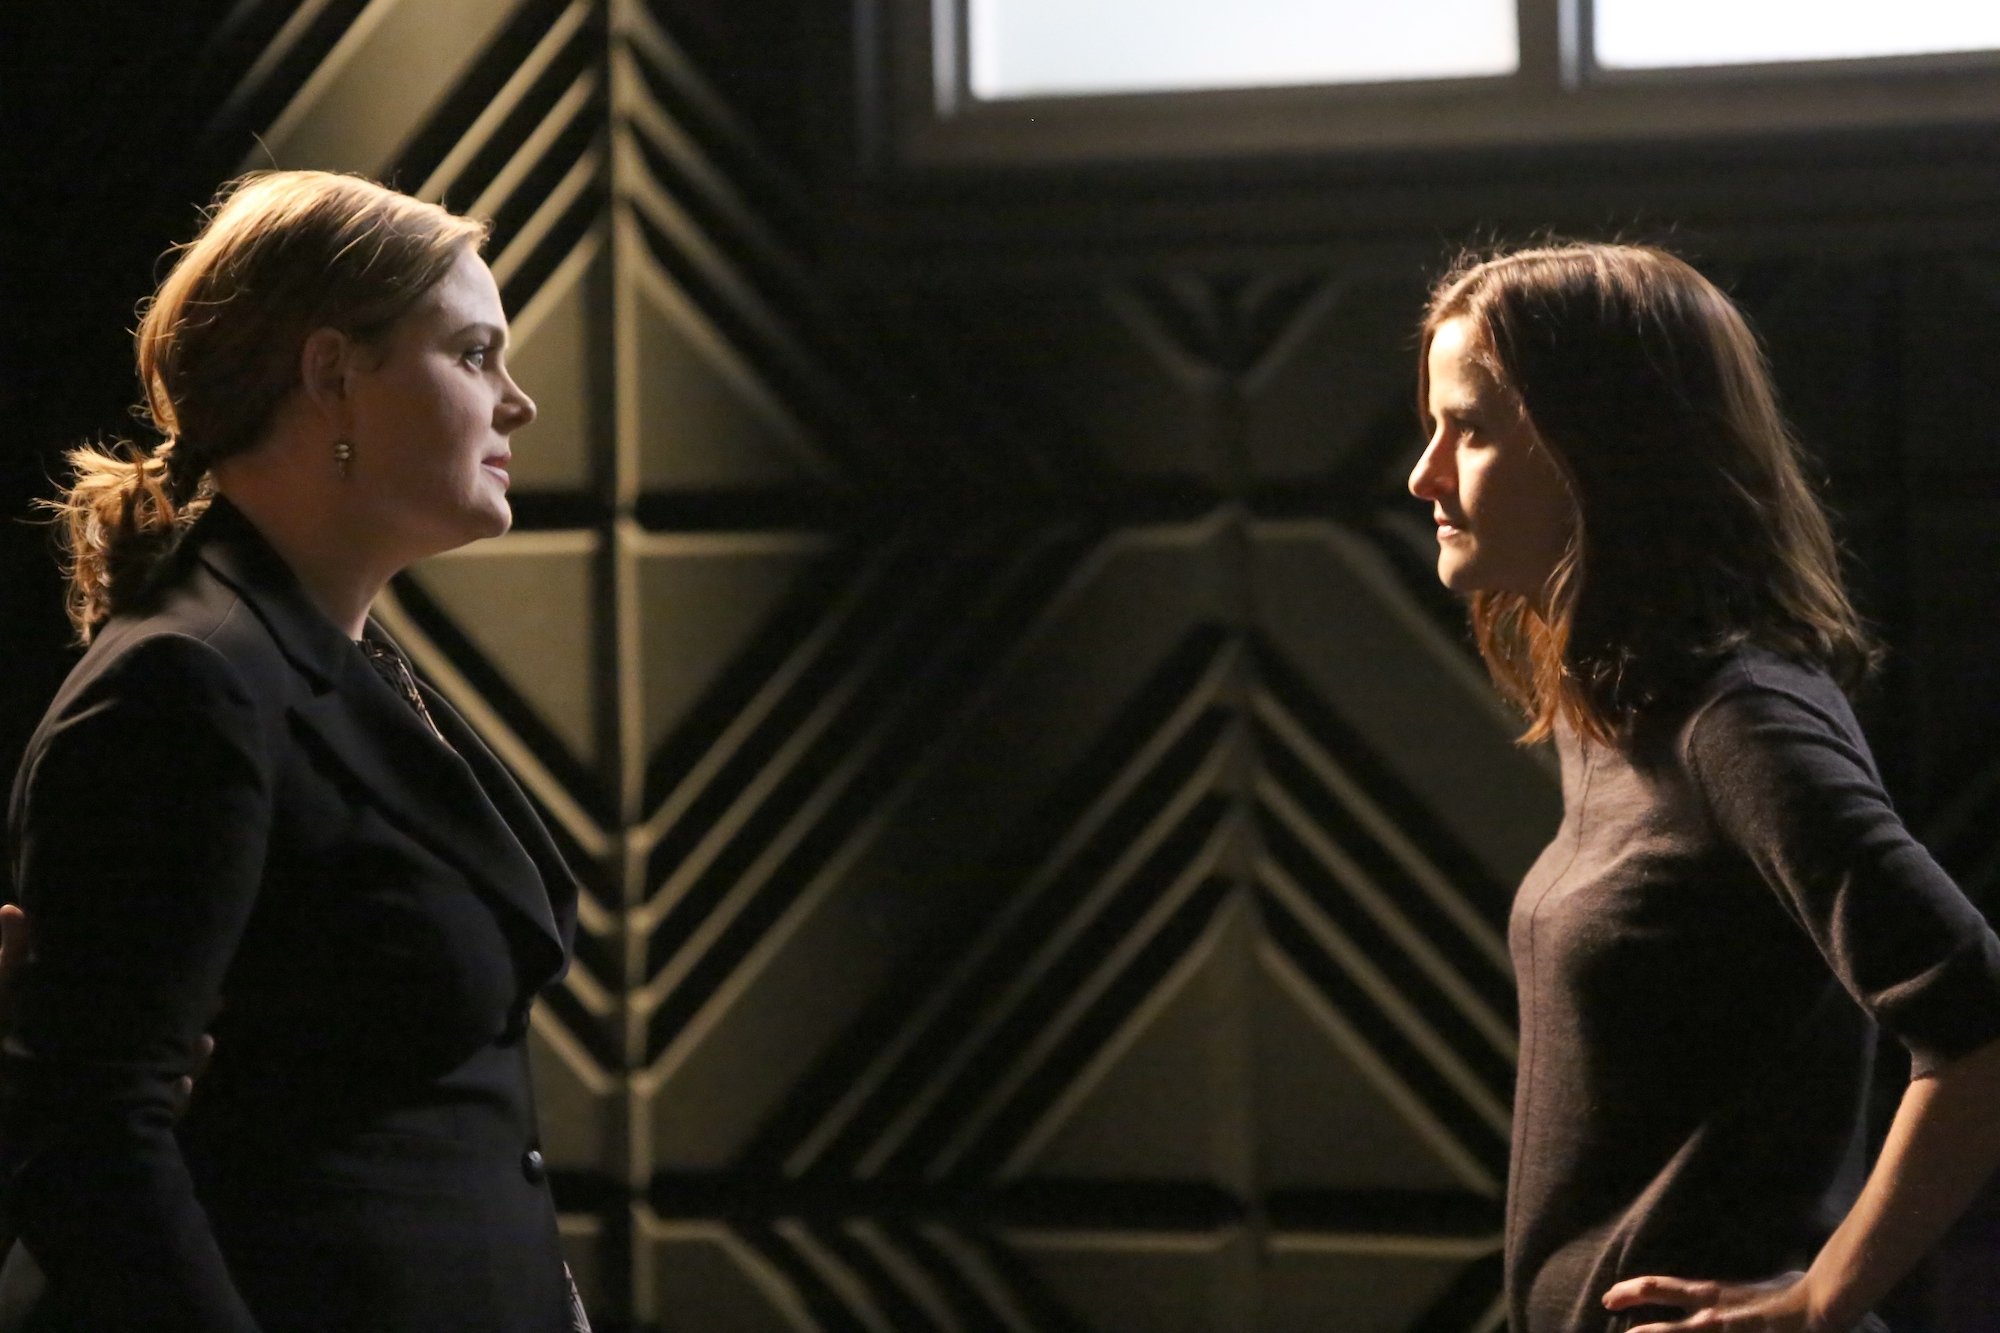 Emily Deschanel and guest star Brittany Shaw Johns